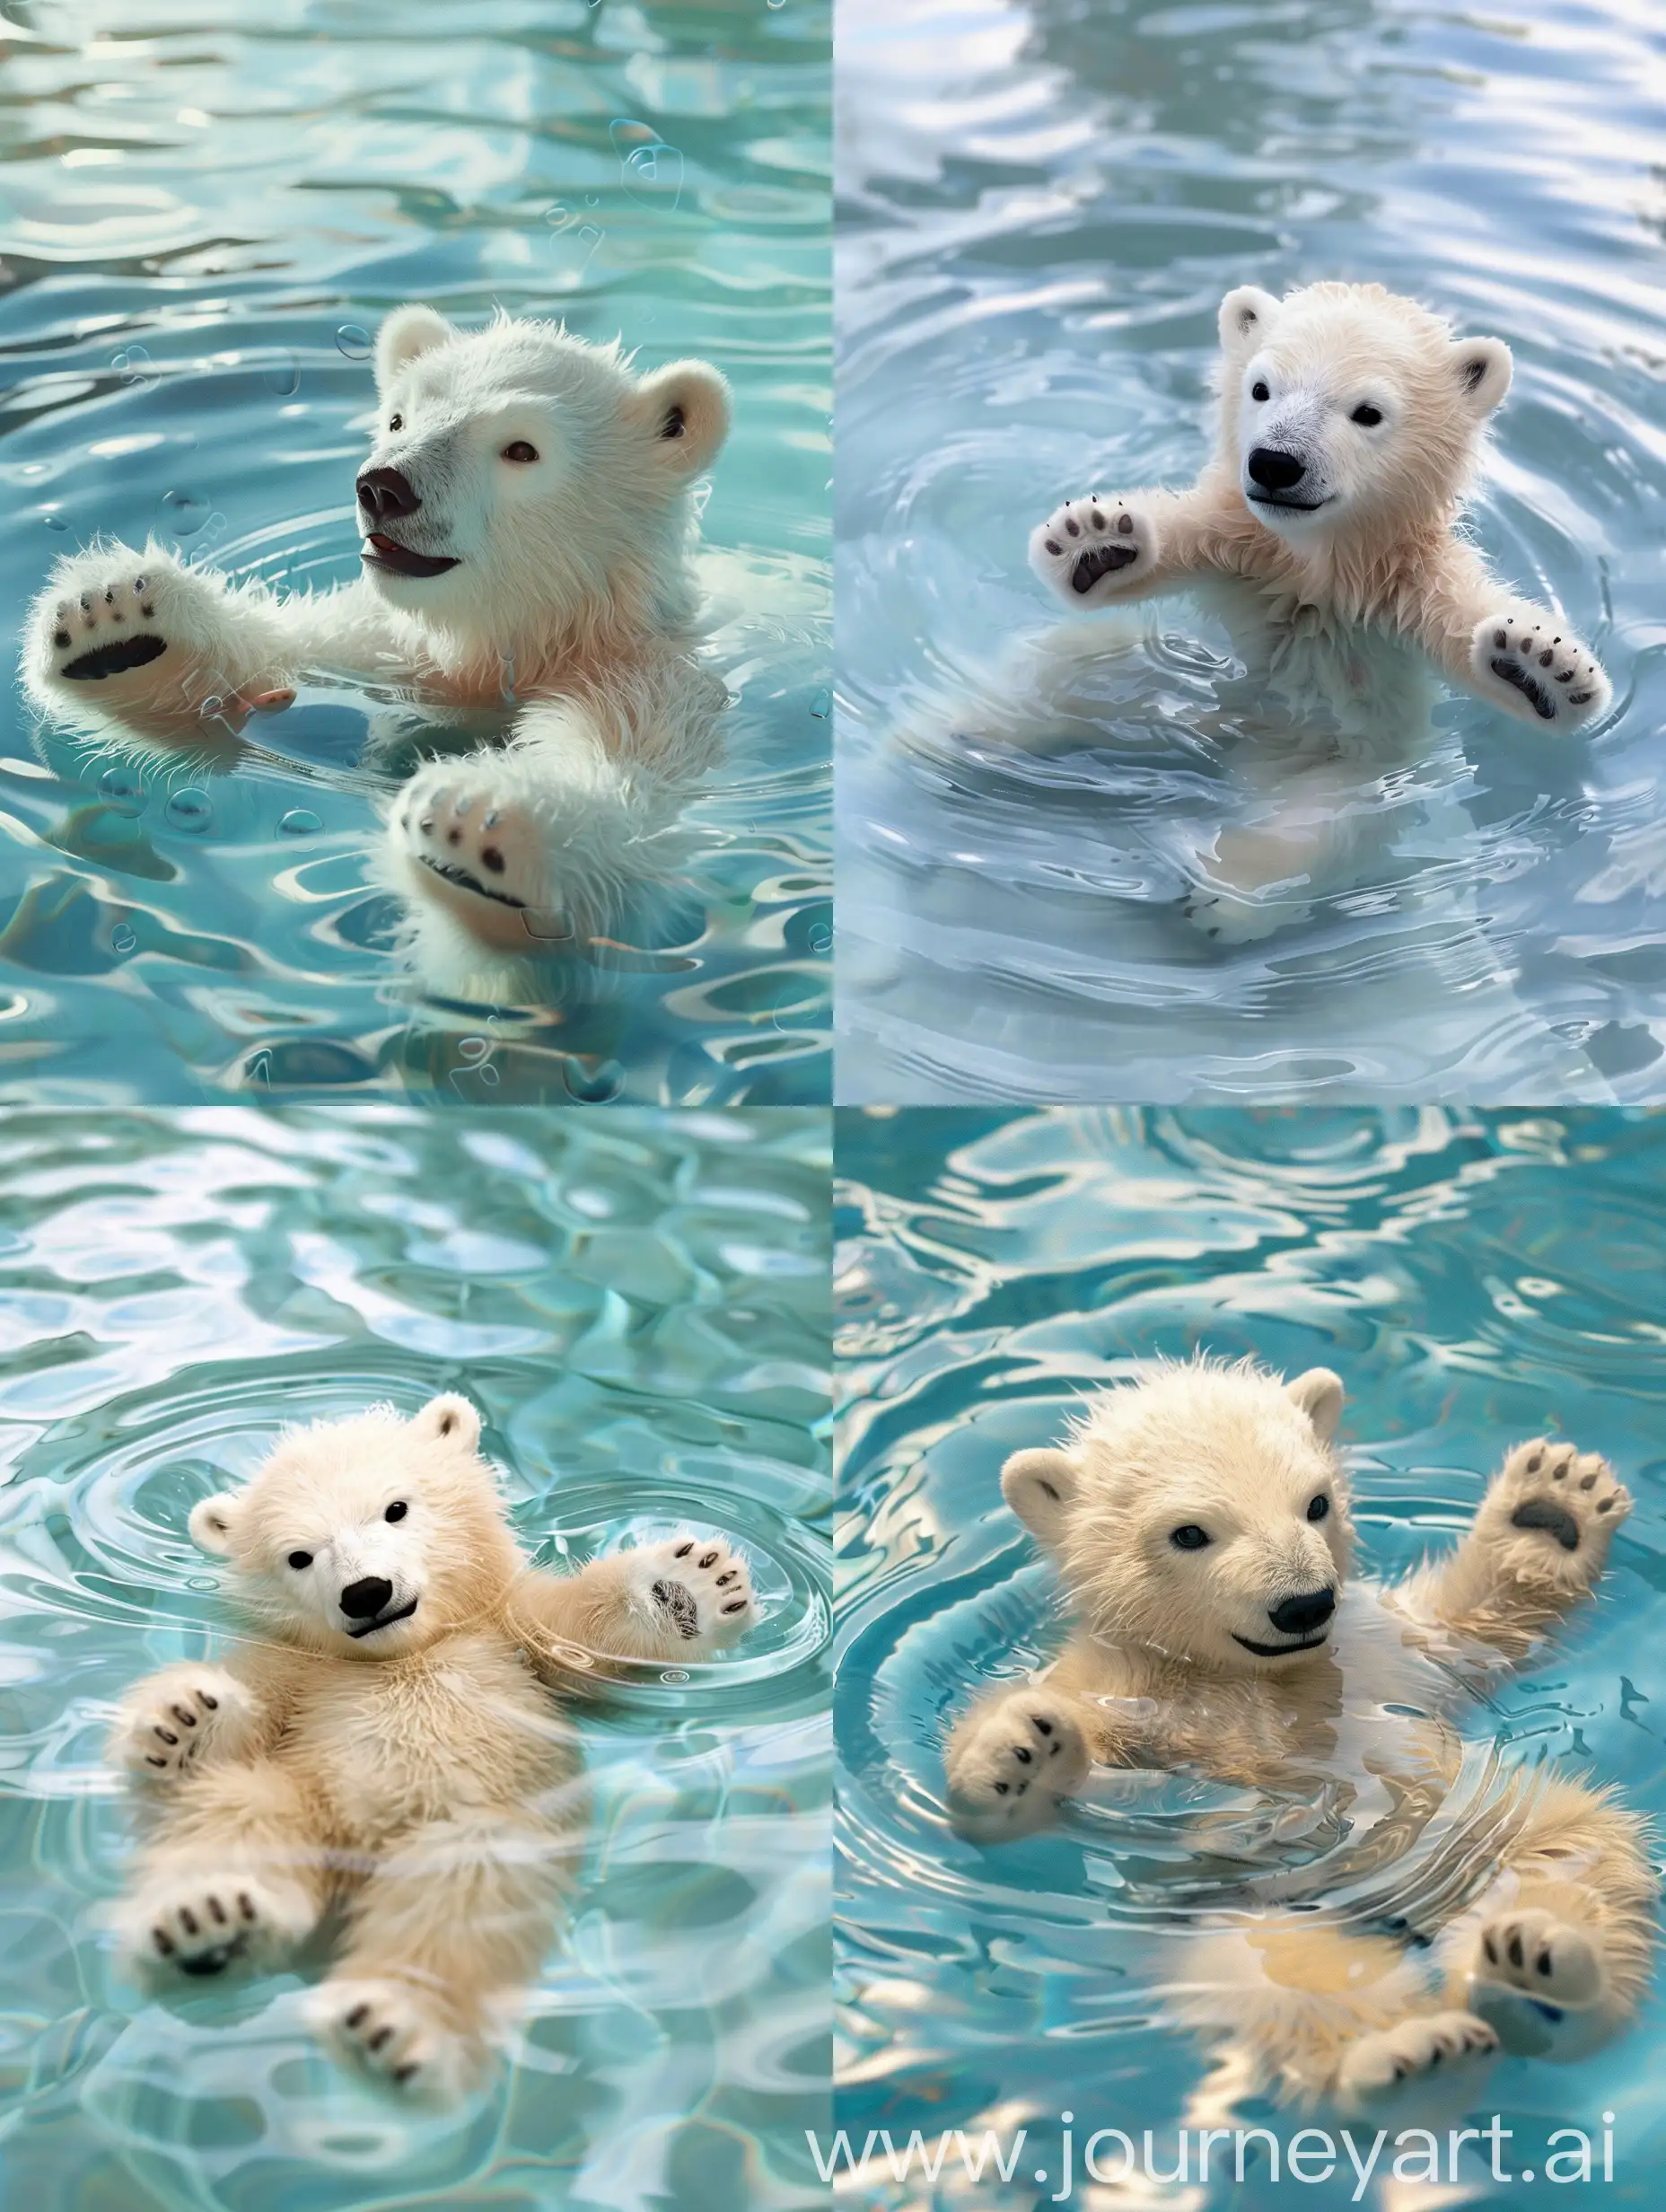 baby polar bear floating in the pool, playing with the water ripples, cute and fluffy, white fur, happy expression, adorable, cinematic shot, in the style of Pixar